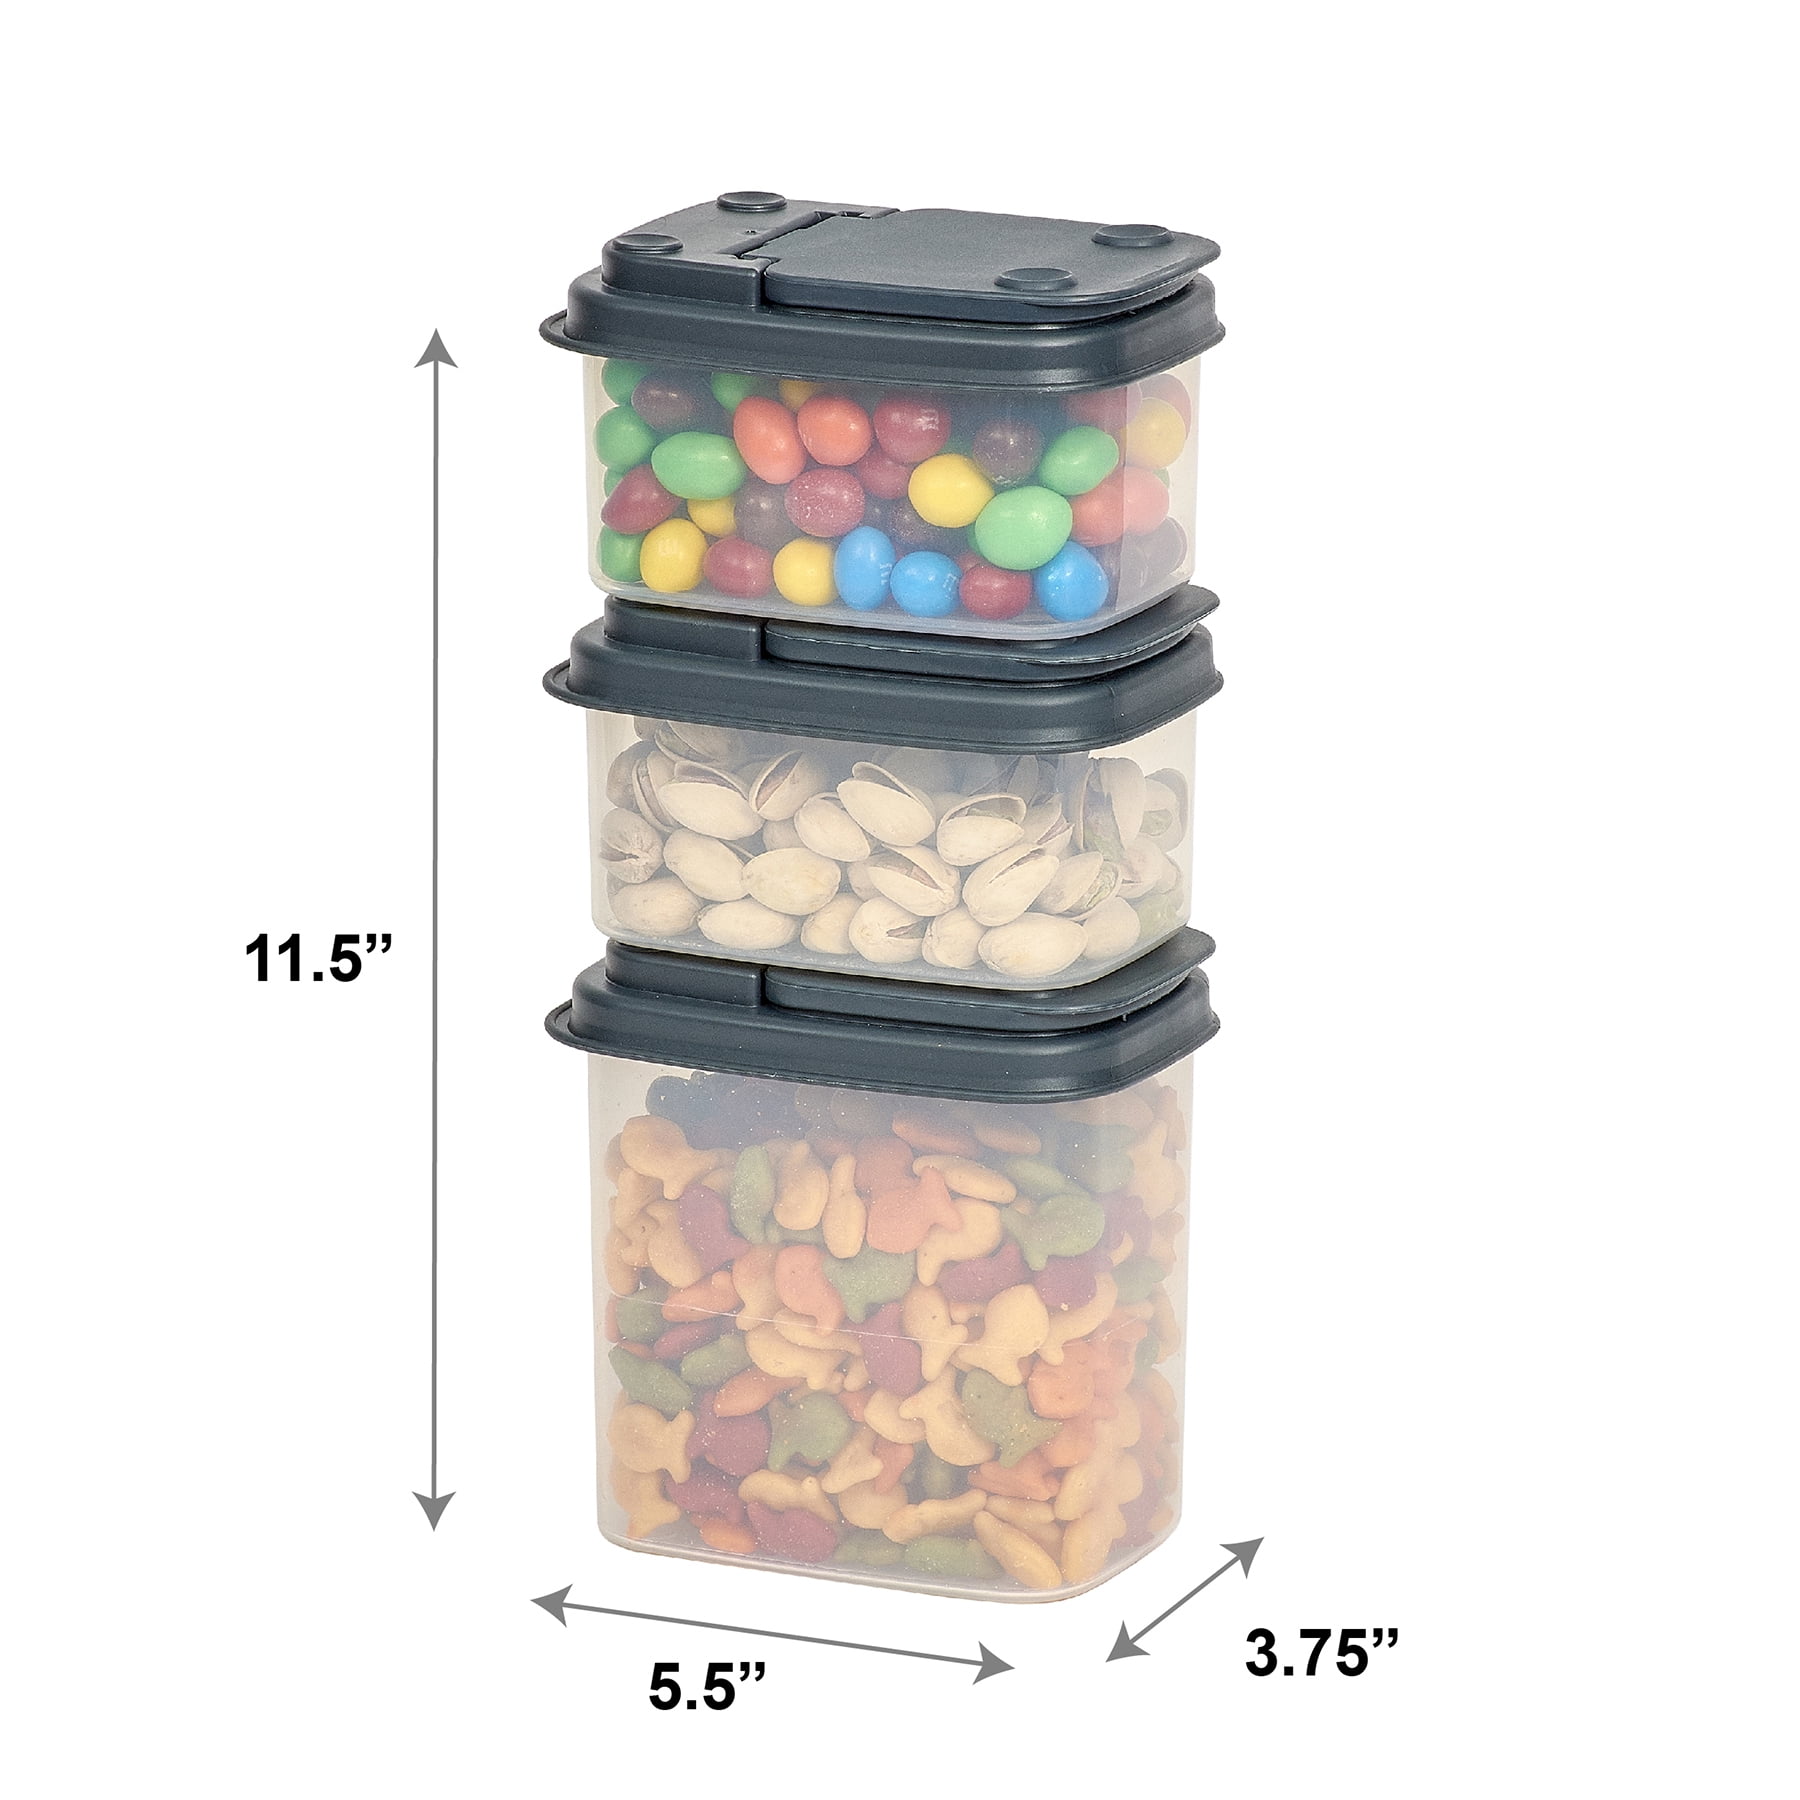 Stackable Snack Tower Food Containers Small Plastic Storage